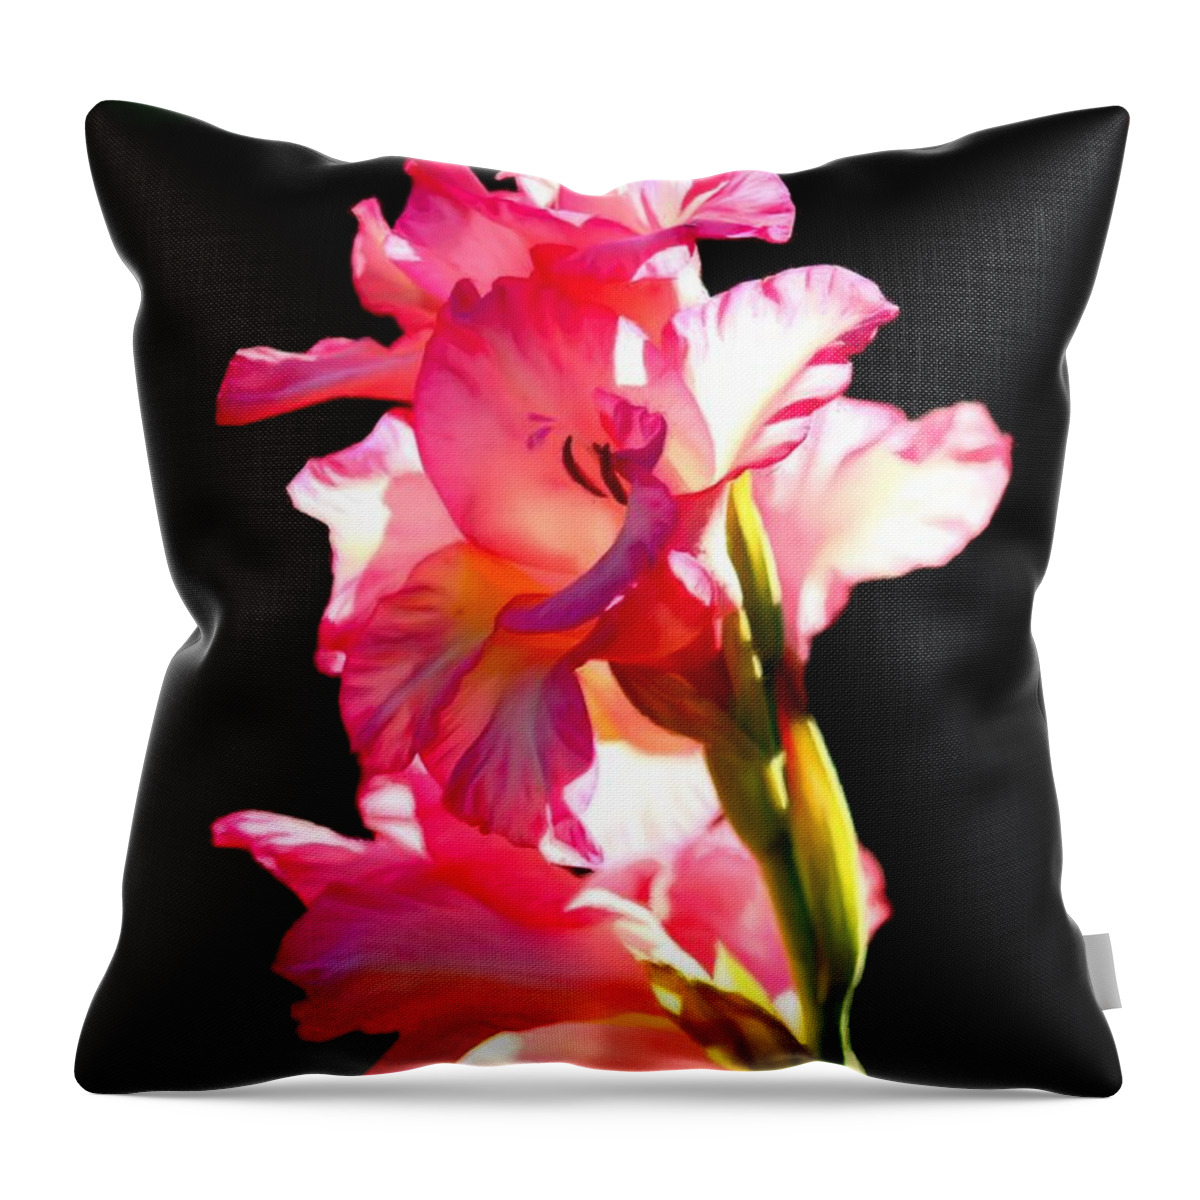 Galadiolus Throw Pillow featuring the photograph Majestic Gladiolus by Patrick Witz